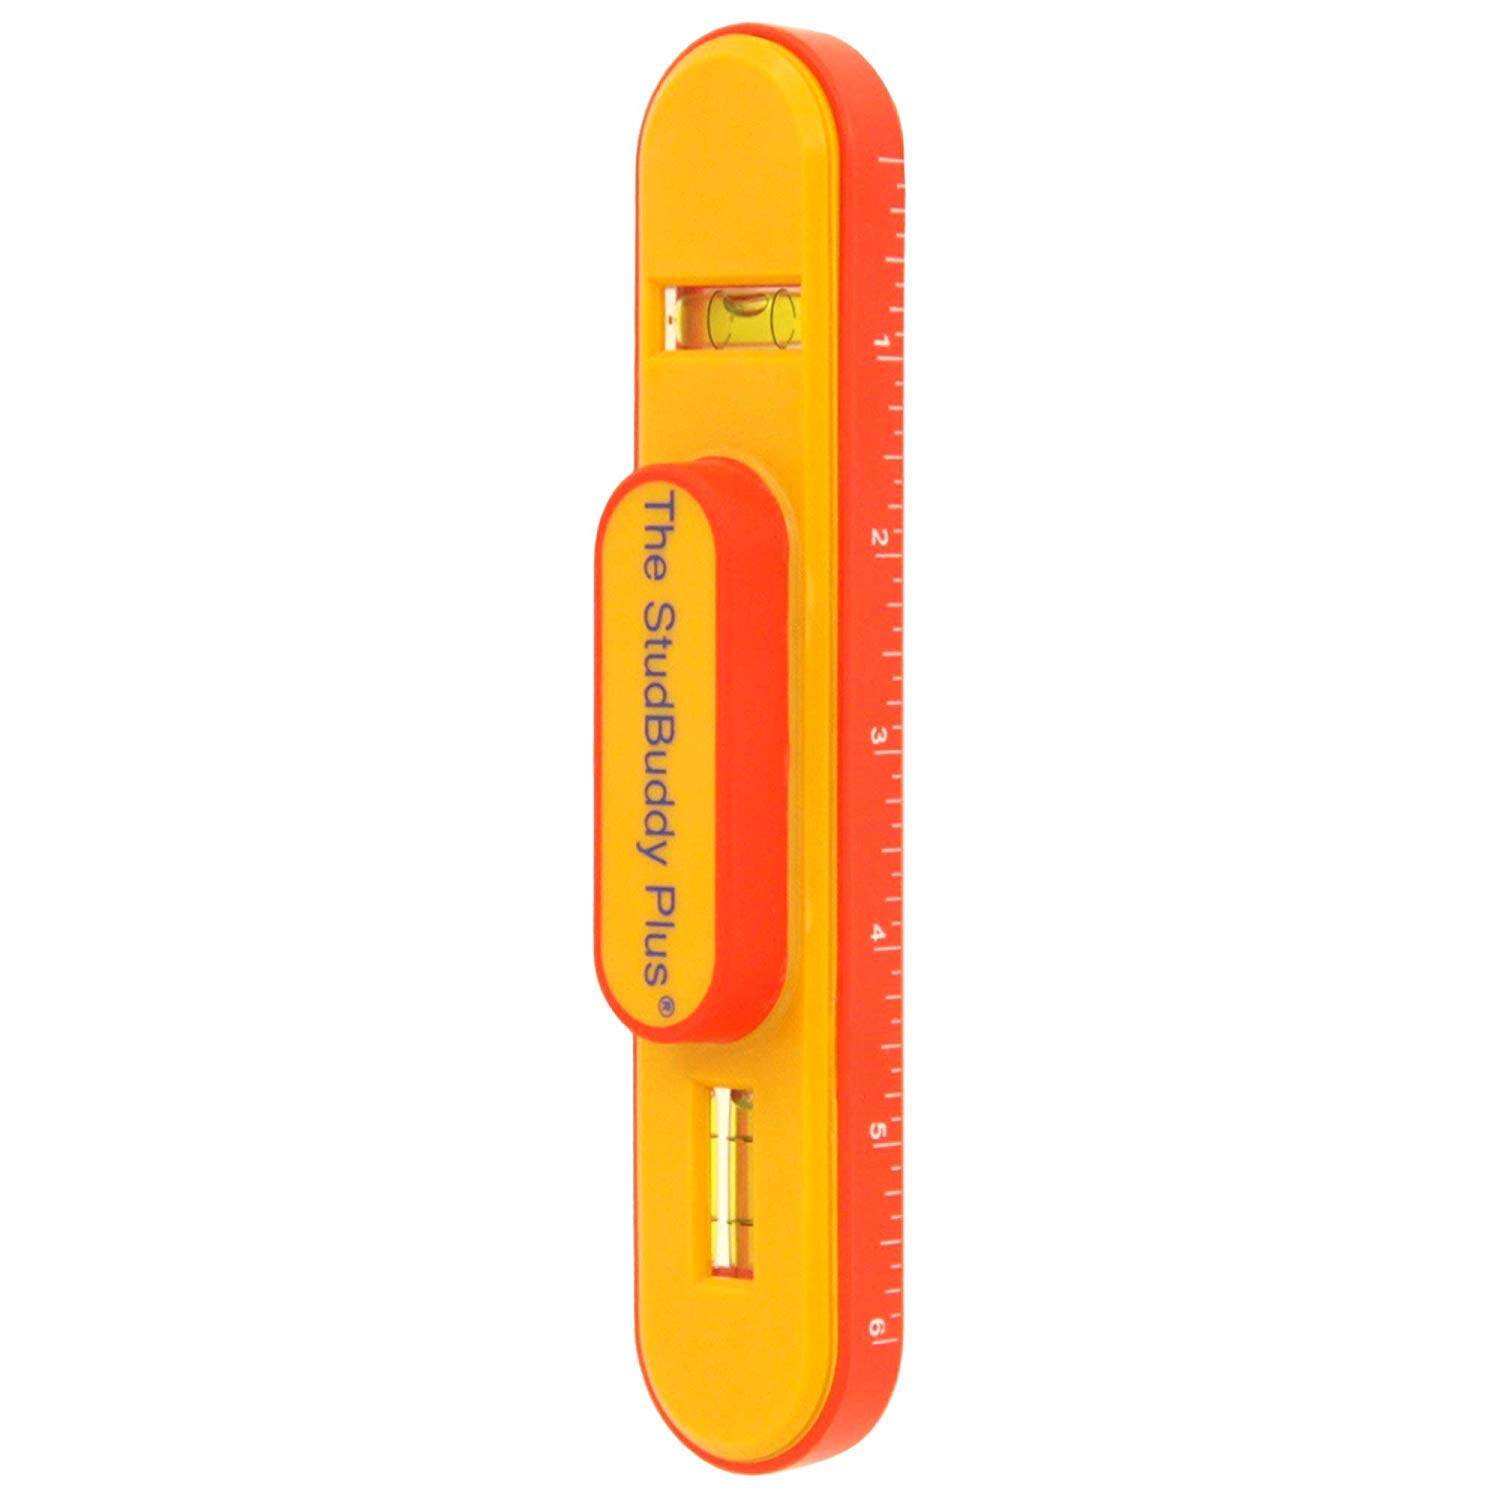 Magnetic Stud Finder - The Studbuddy